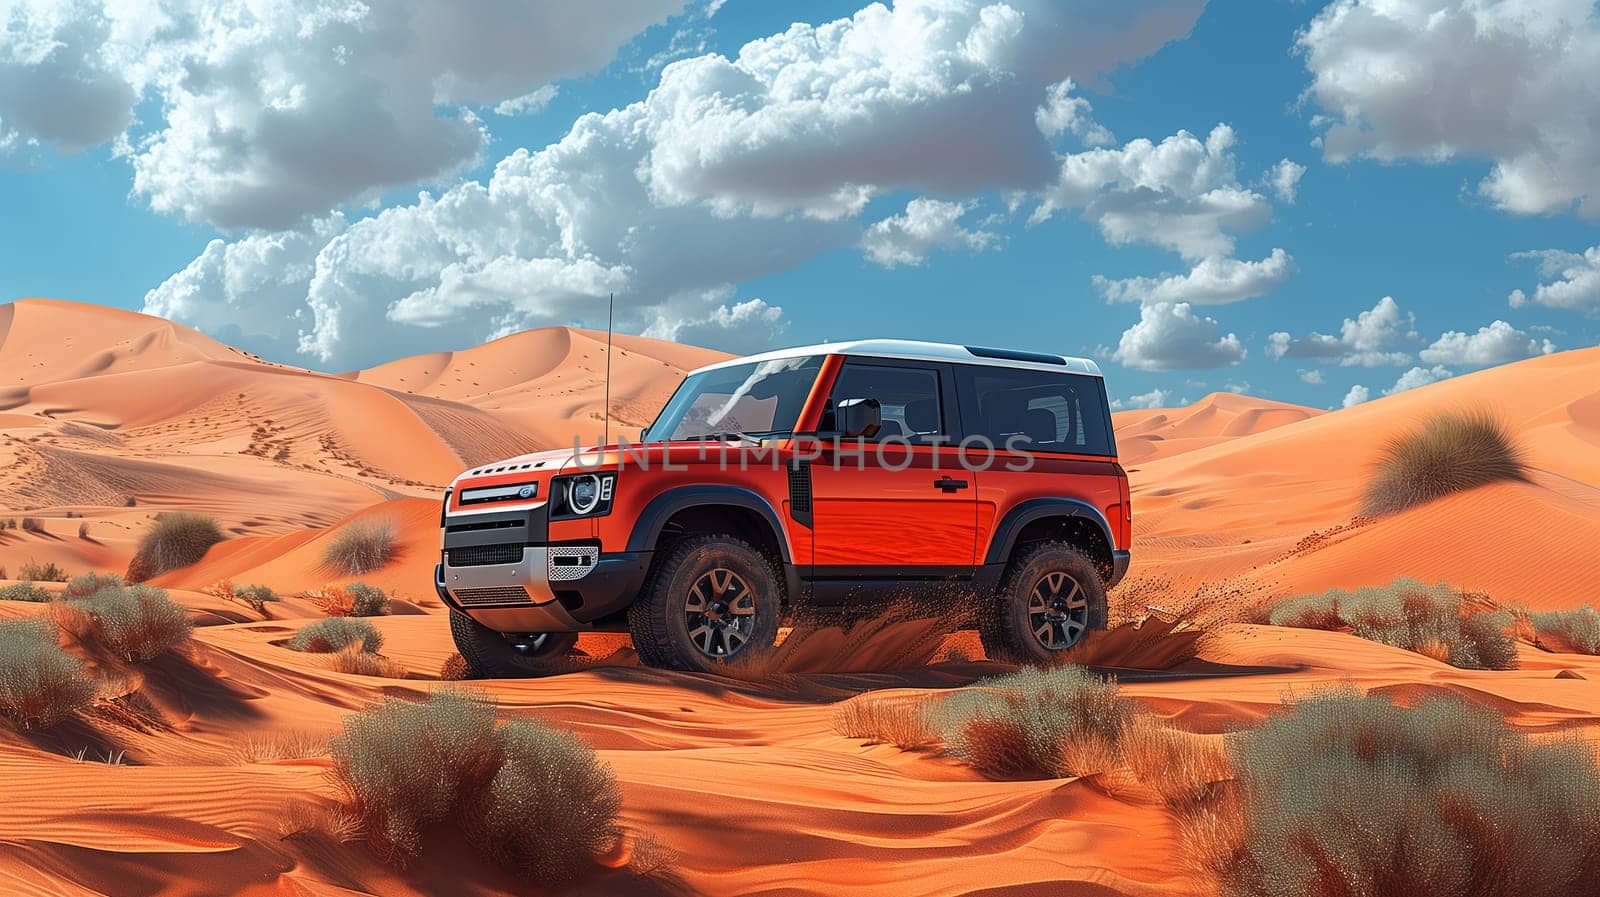 A red Land Rover Defender with rugged tires is parked amidst the desert with only the vast sky and clouds as companions. The vehicles fender and wheel stand out against the sandy terrain